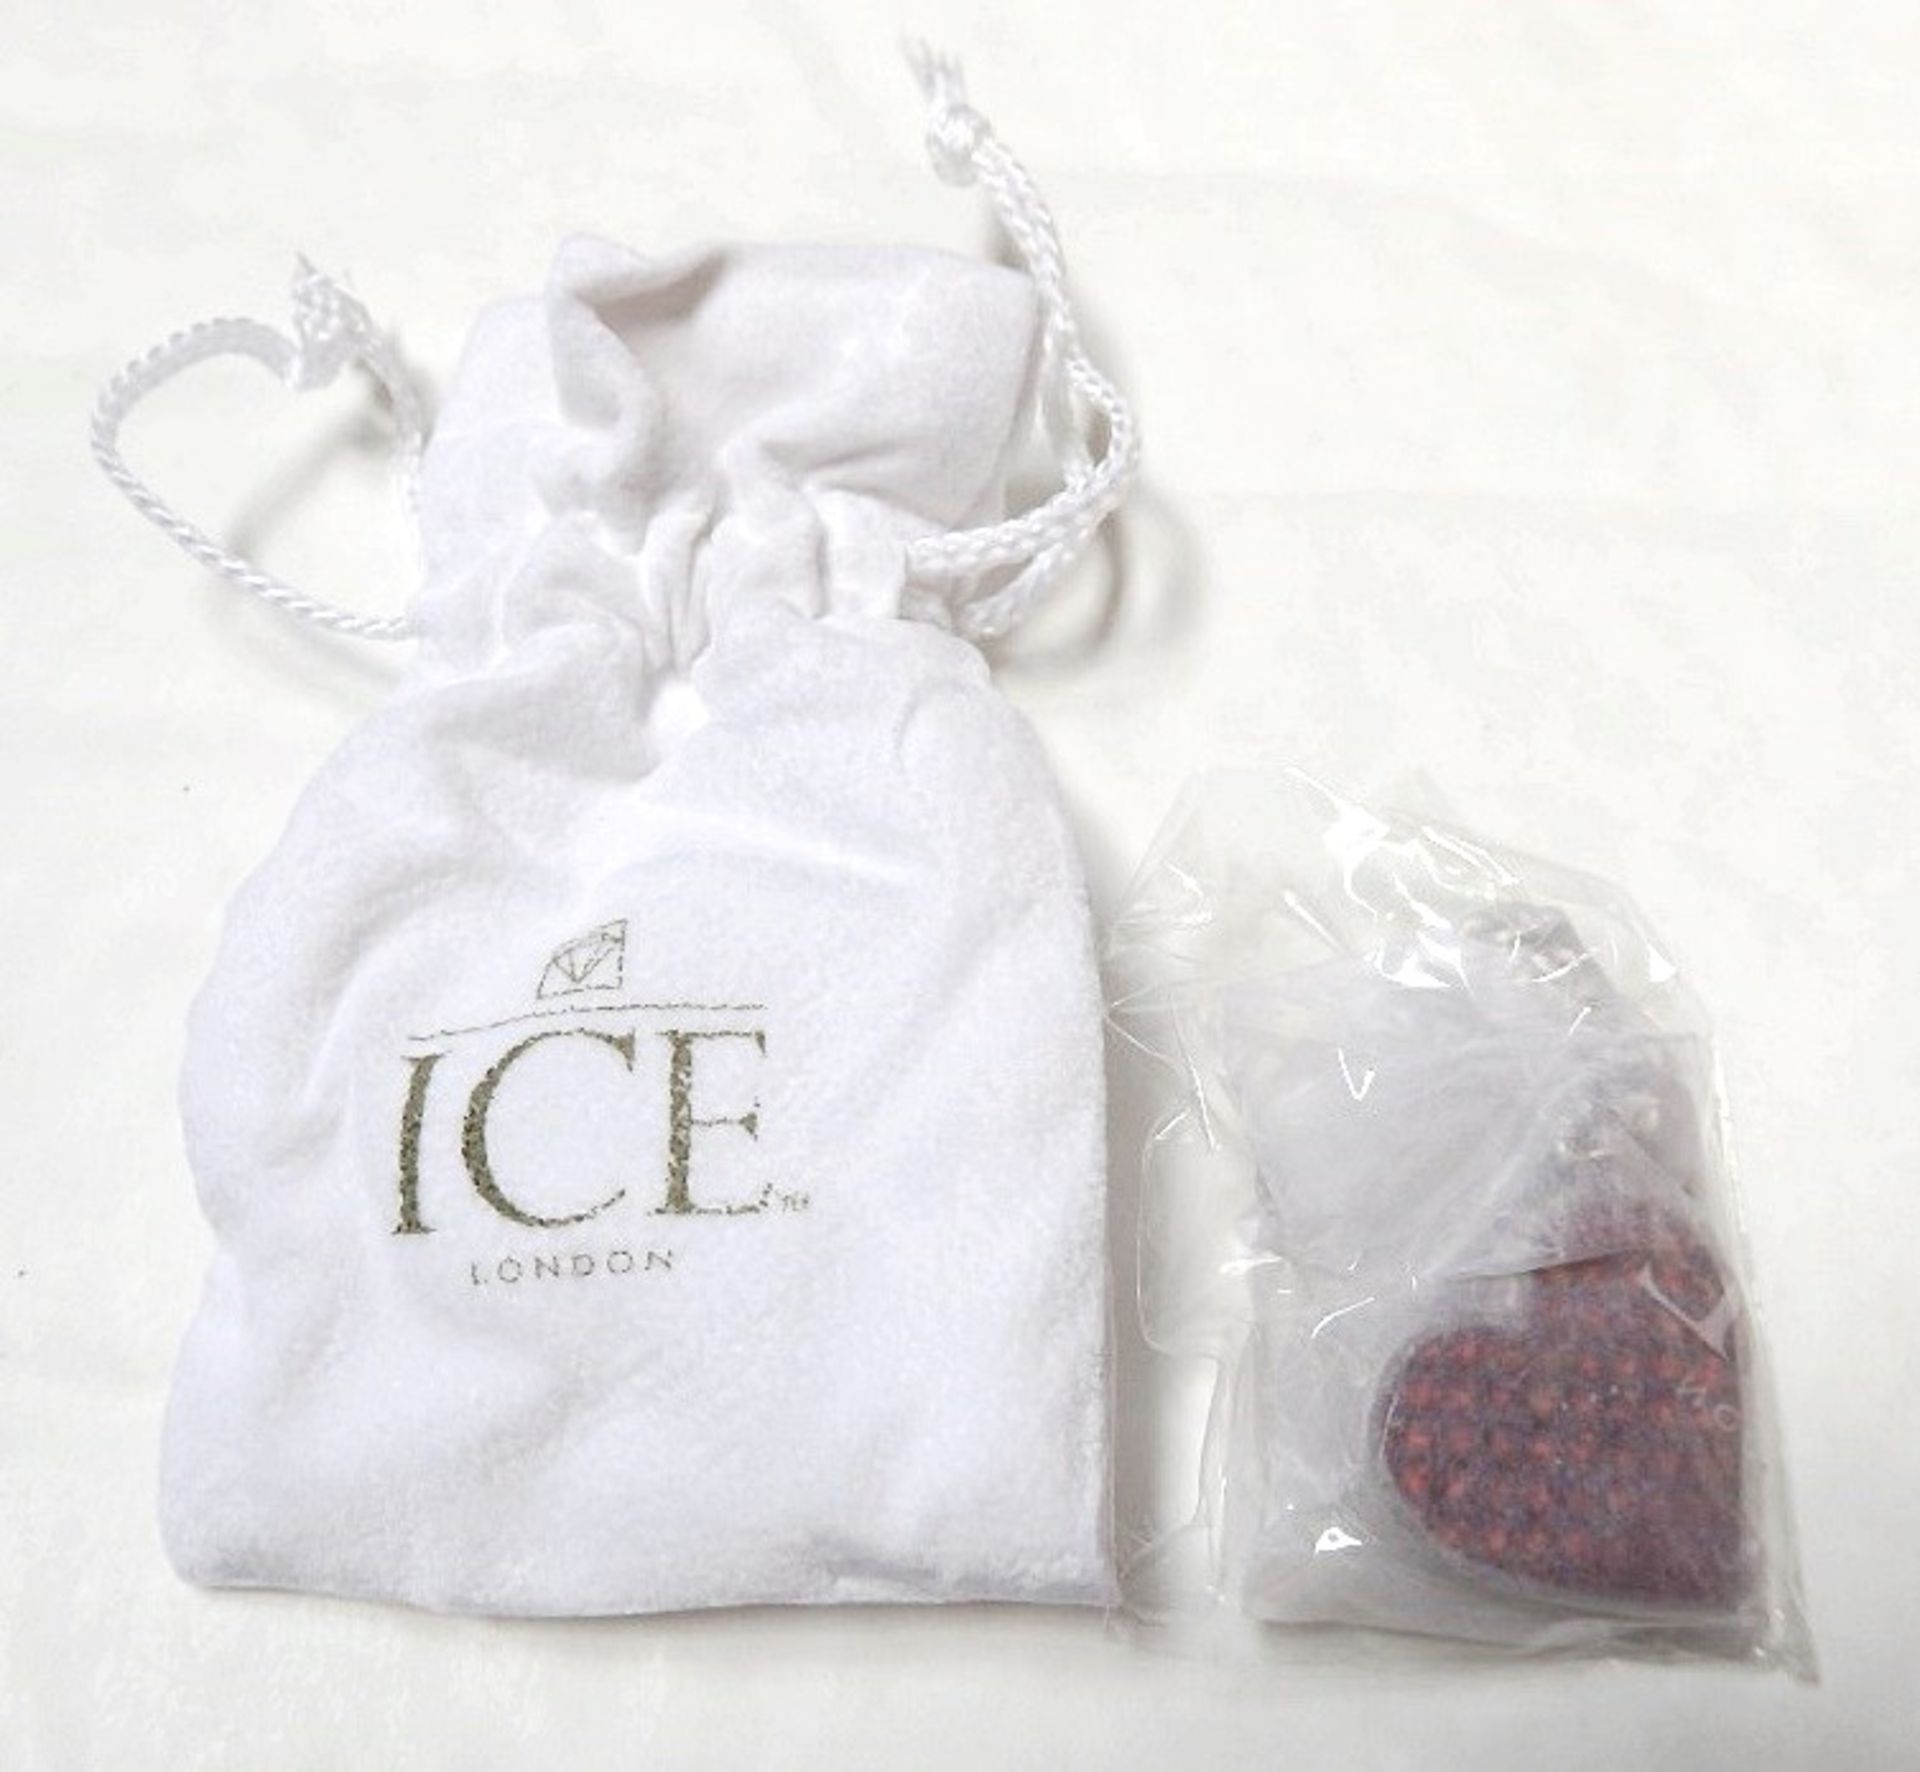 10 x Sterling Silver Plated Red Heart Key Rings with ICE London Crystals - Brand New & Sealed - Image 3 of 5